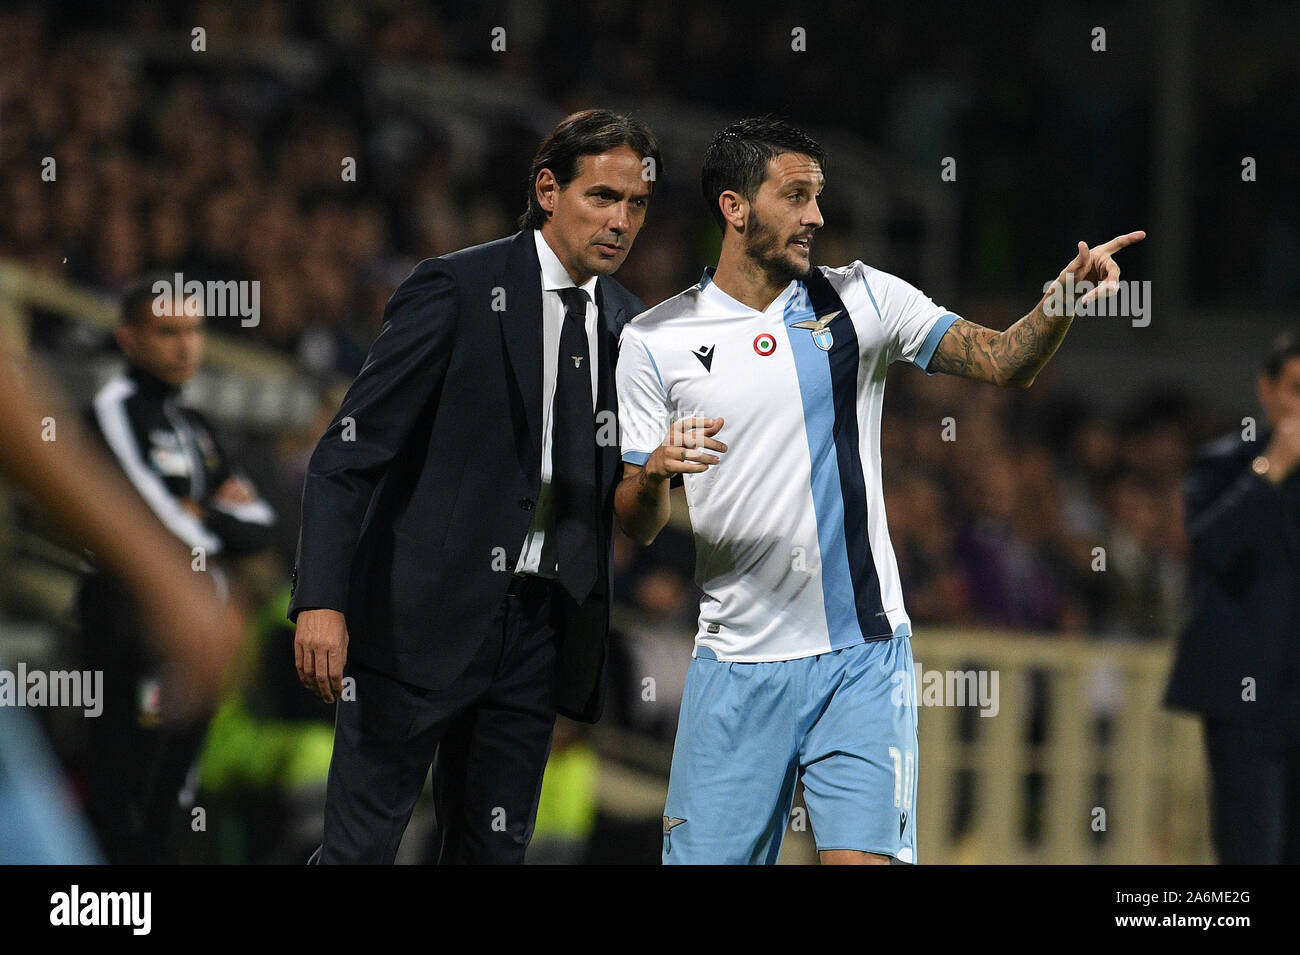 Firenze, Italy. 27th Oct, 2019. simone inzaghi with luis albertoduring, Italian Soccer Serie A Men Championship in Firenze, Italy, October 27 2019 - LPS/Matteo Papini Credit: Matteo Papini/LPS/ZUMA Wire/Alamy Live News Stock Photo